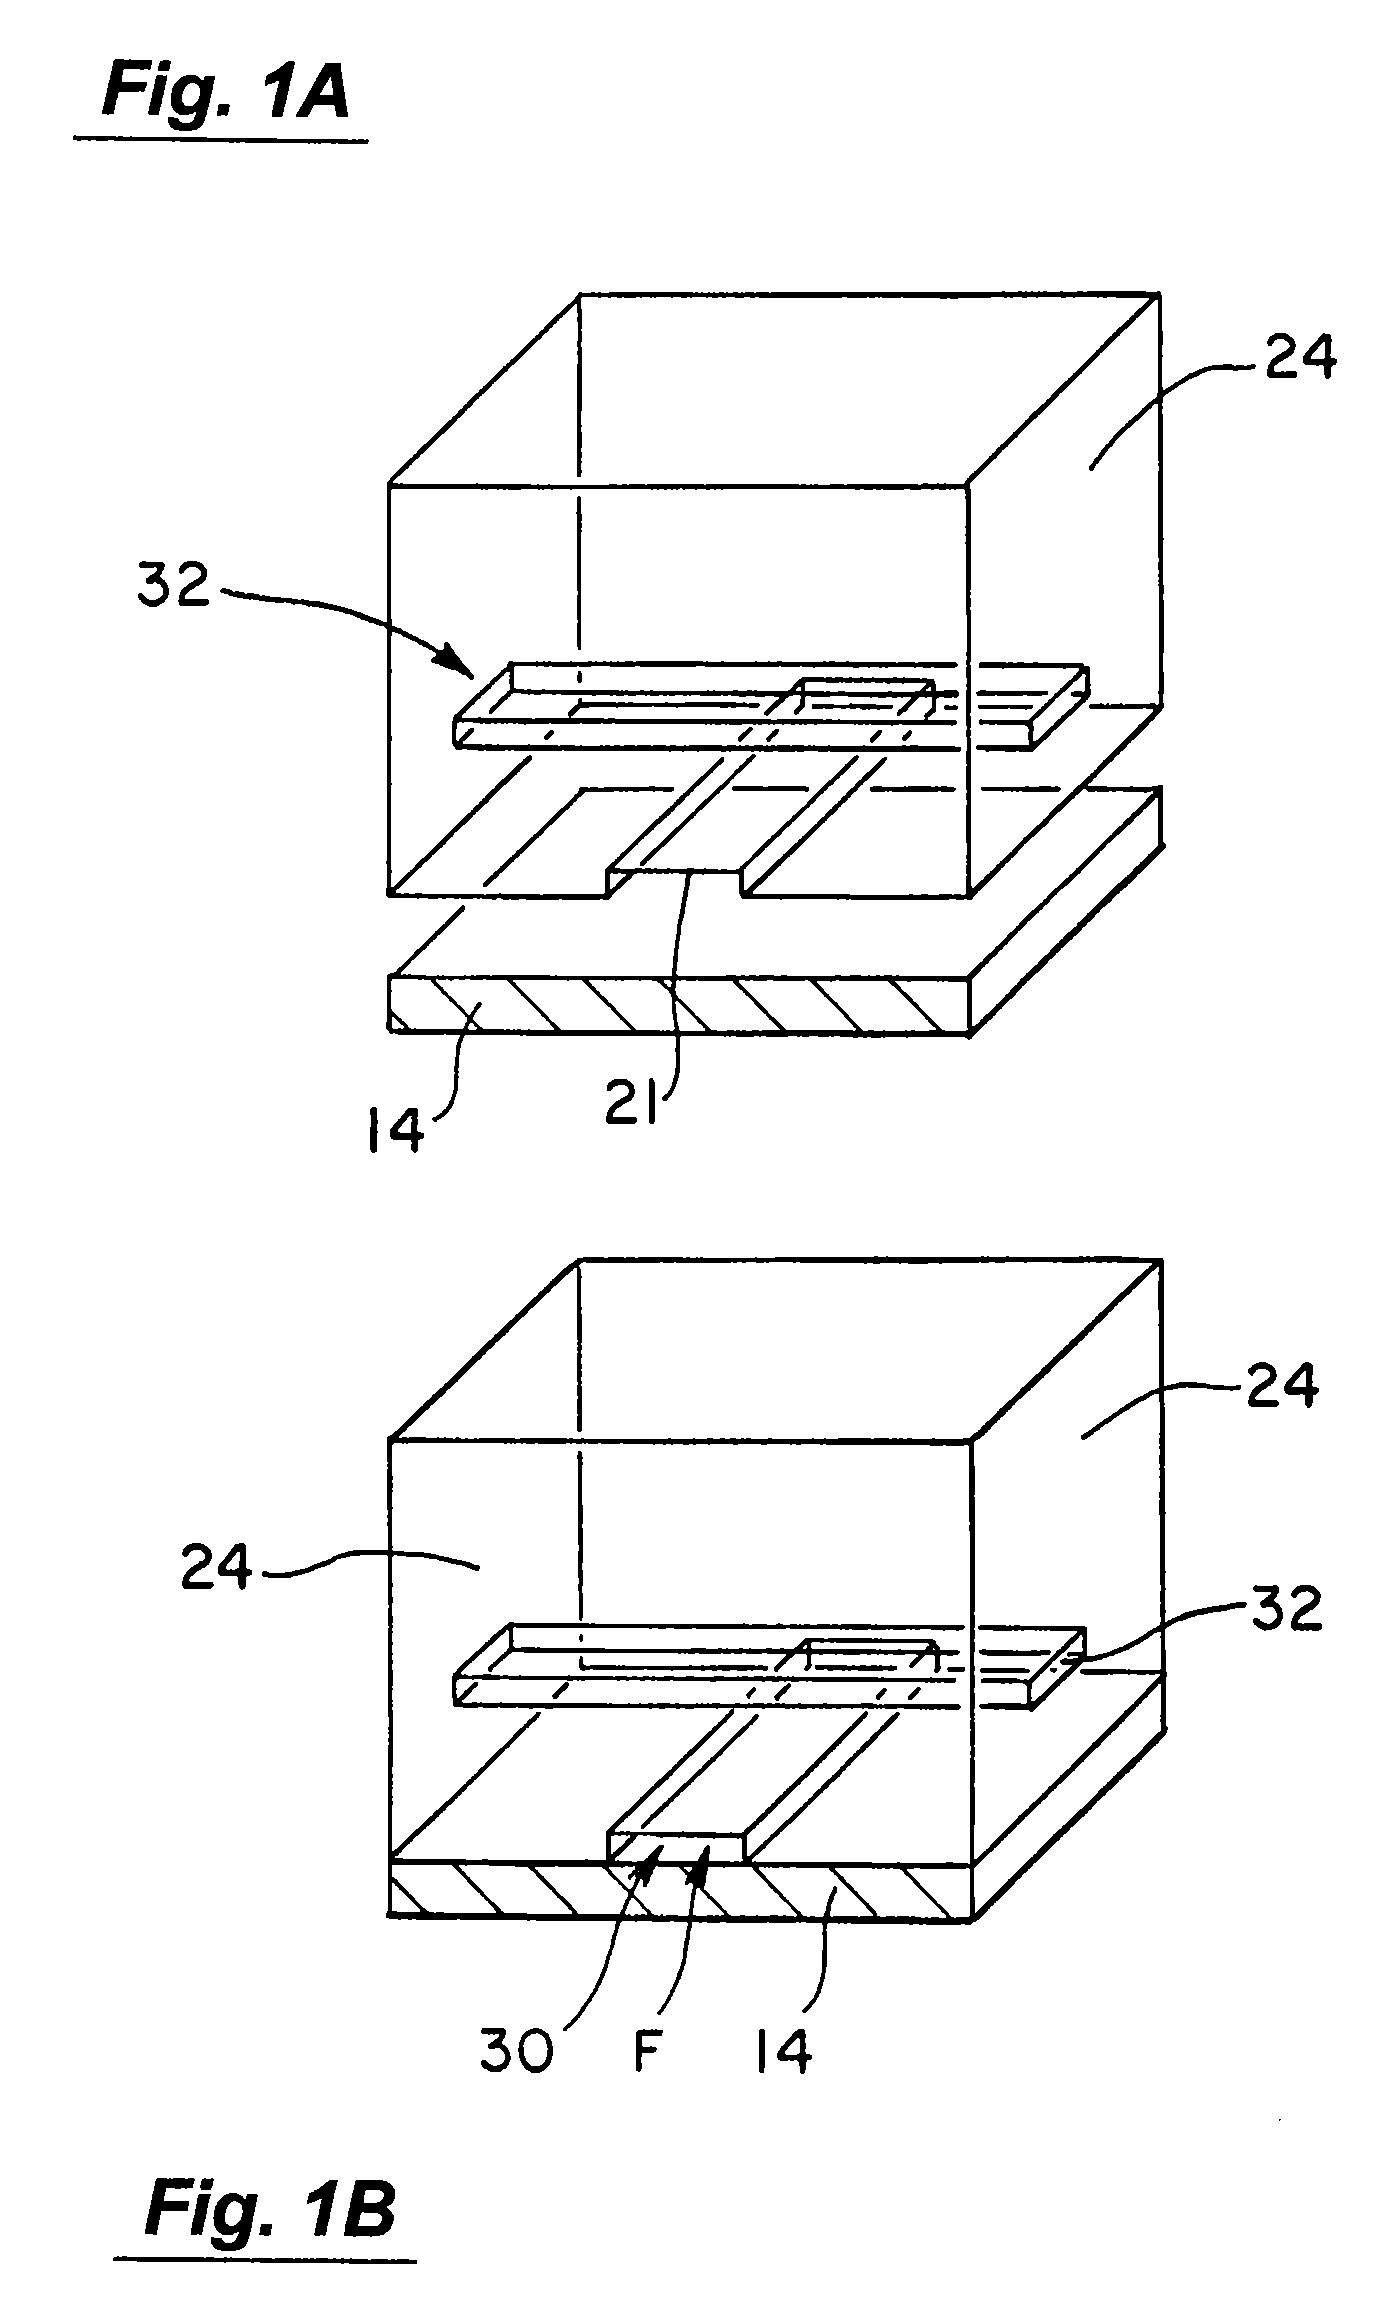 Apparatus and methods for conducting assays and high throughput screening